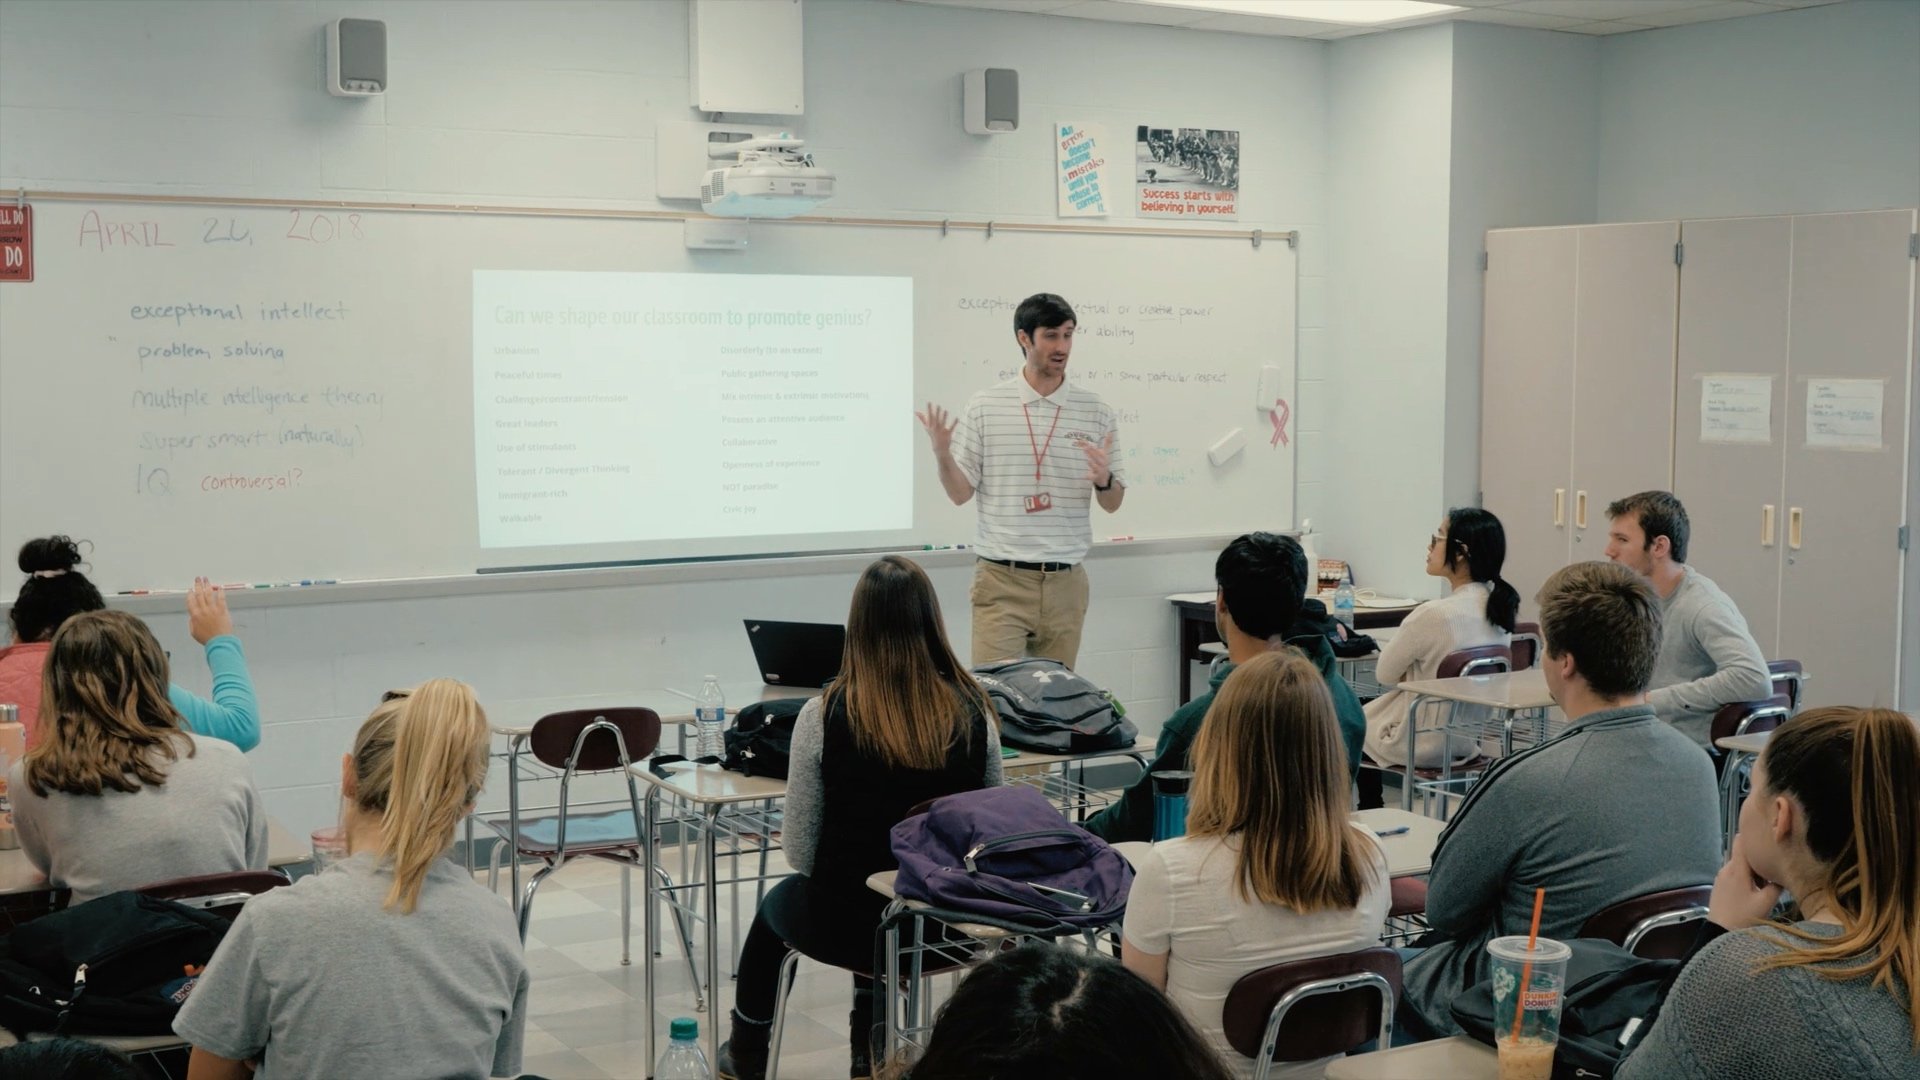 A teacher giving a lecture in a classroom full of students